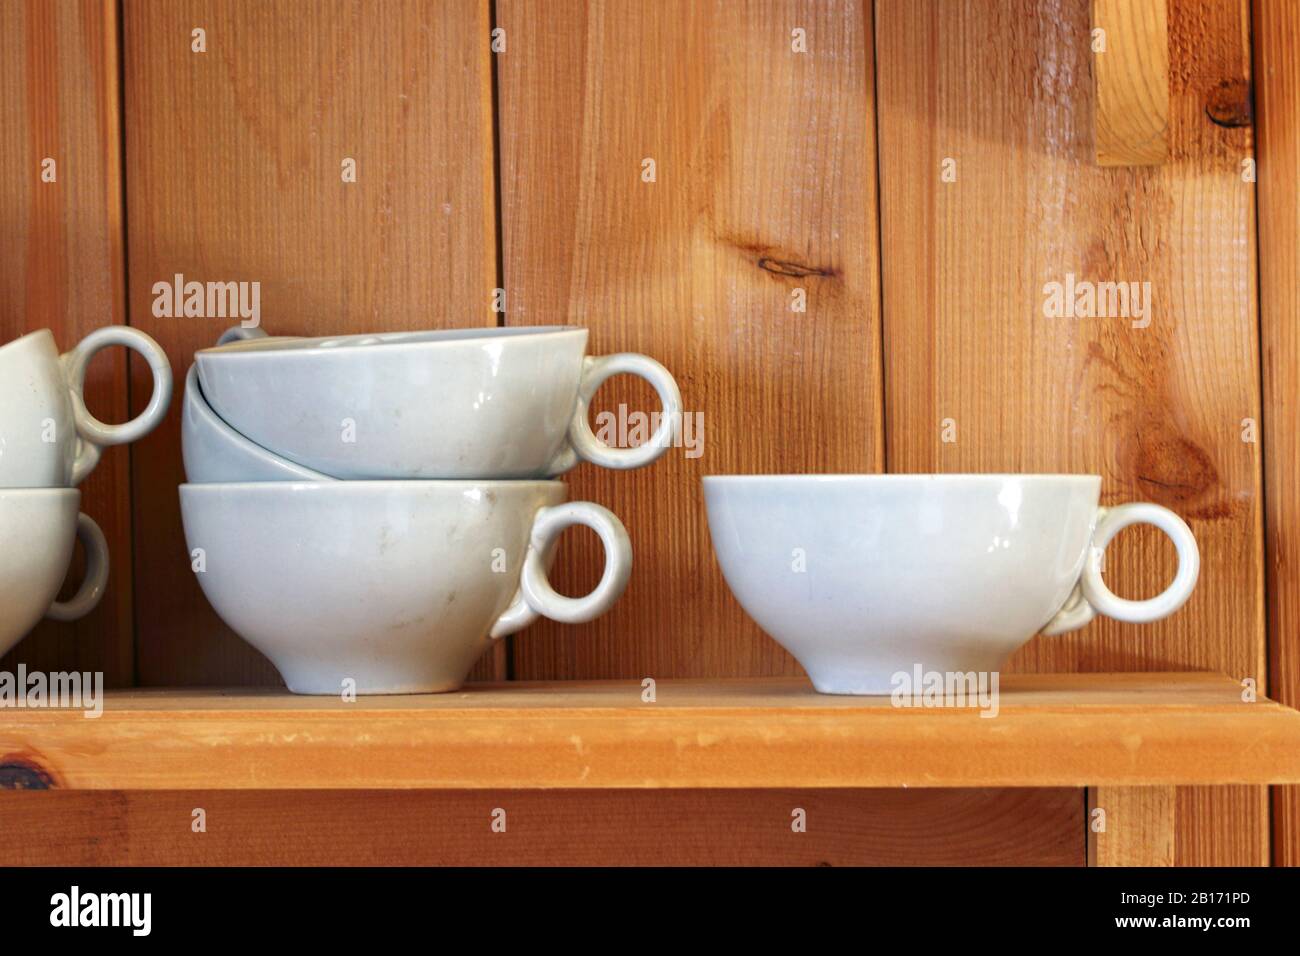 https://c8.alamy.com/comp/2B171PD/china-coffee-cups-stacked-in-a-cupboard-2B171PD.jpg